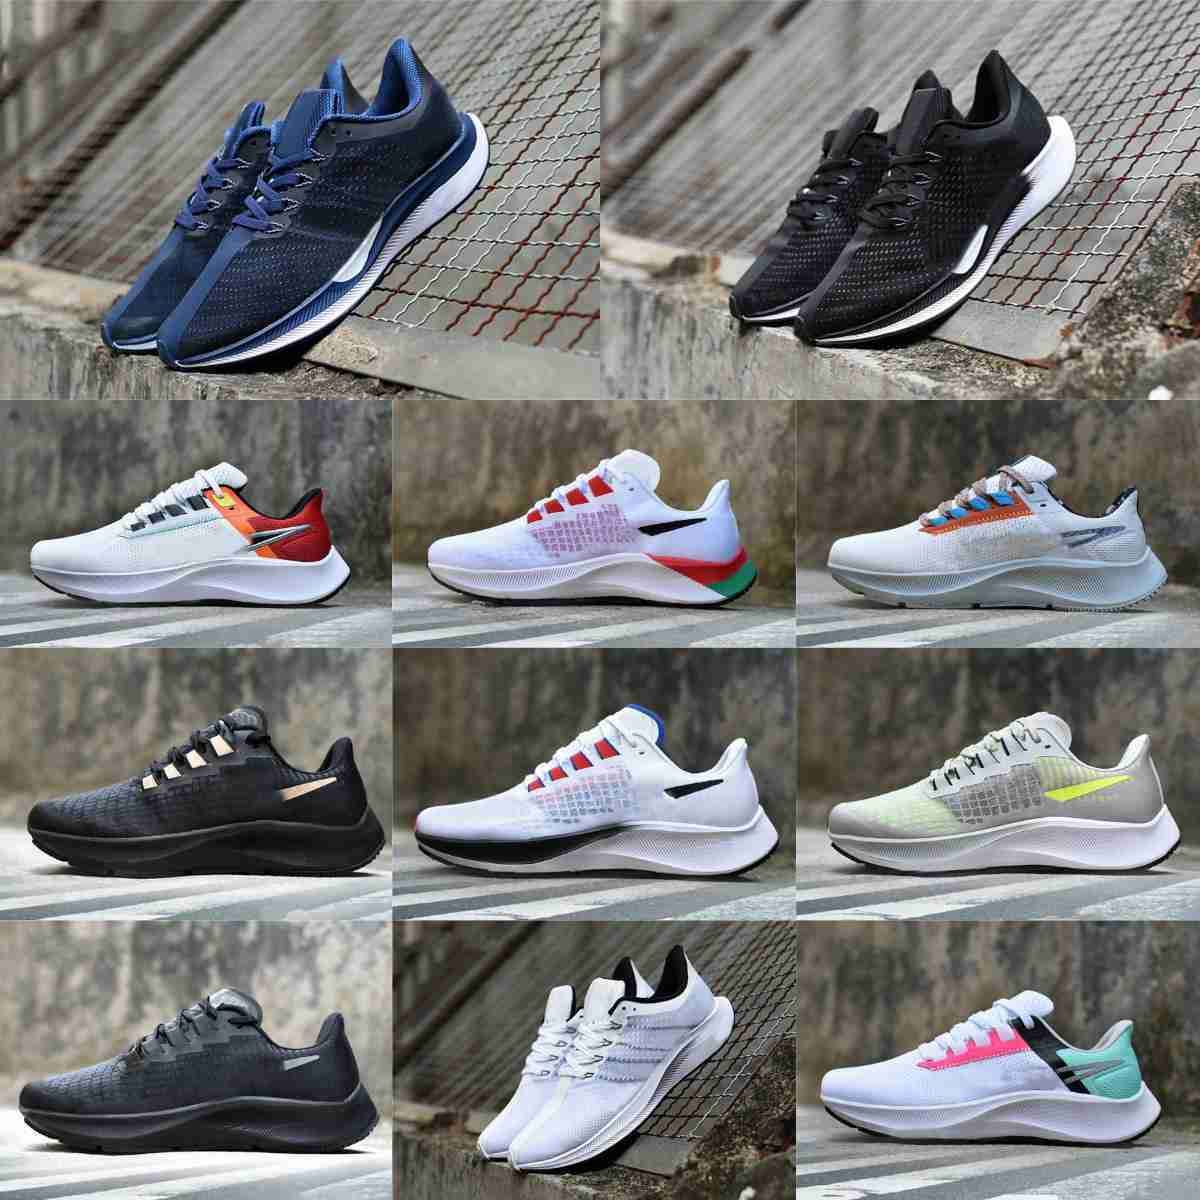 

Trainers Pegasus 39 35 Turbo Casual Sports Shoes ZOOM Flyease Be True 37 38 Triple White Midnight Black Navy Chlorine Blue Ribbon Green Wolf Grey Designers Sneakers S8, Please contact us